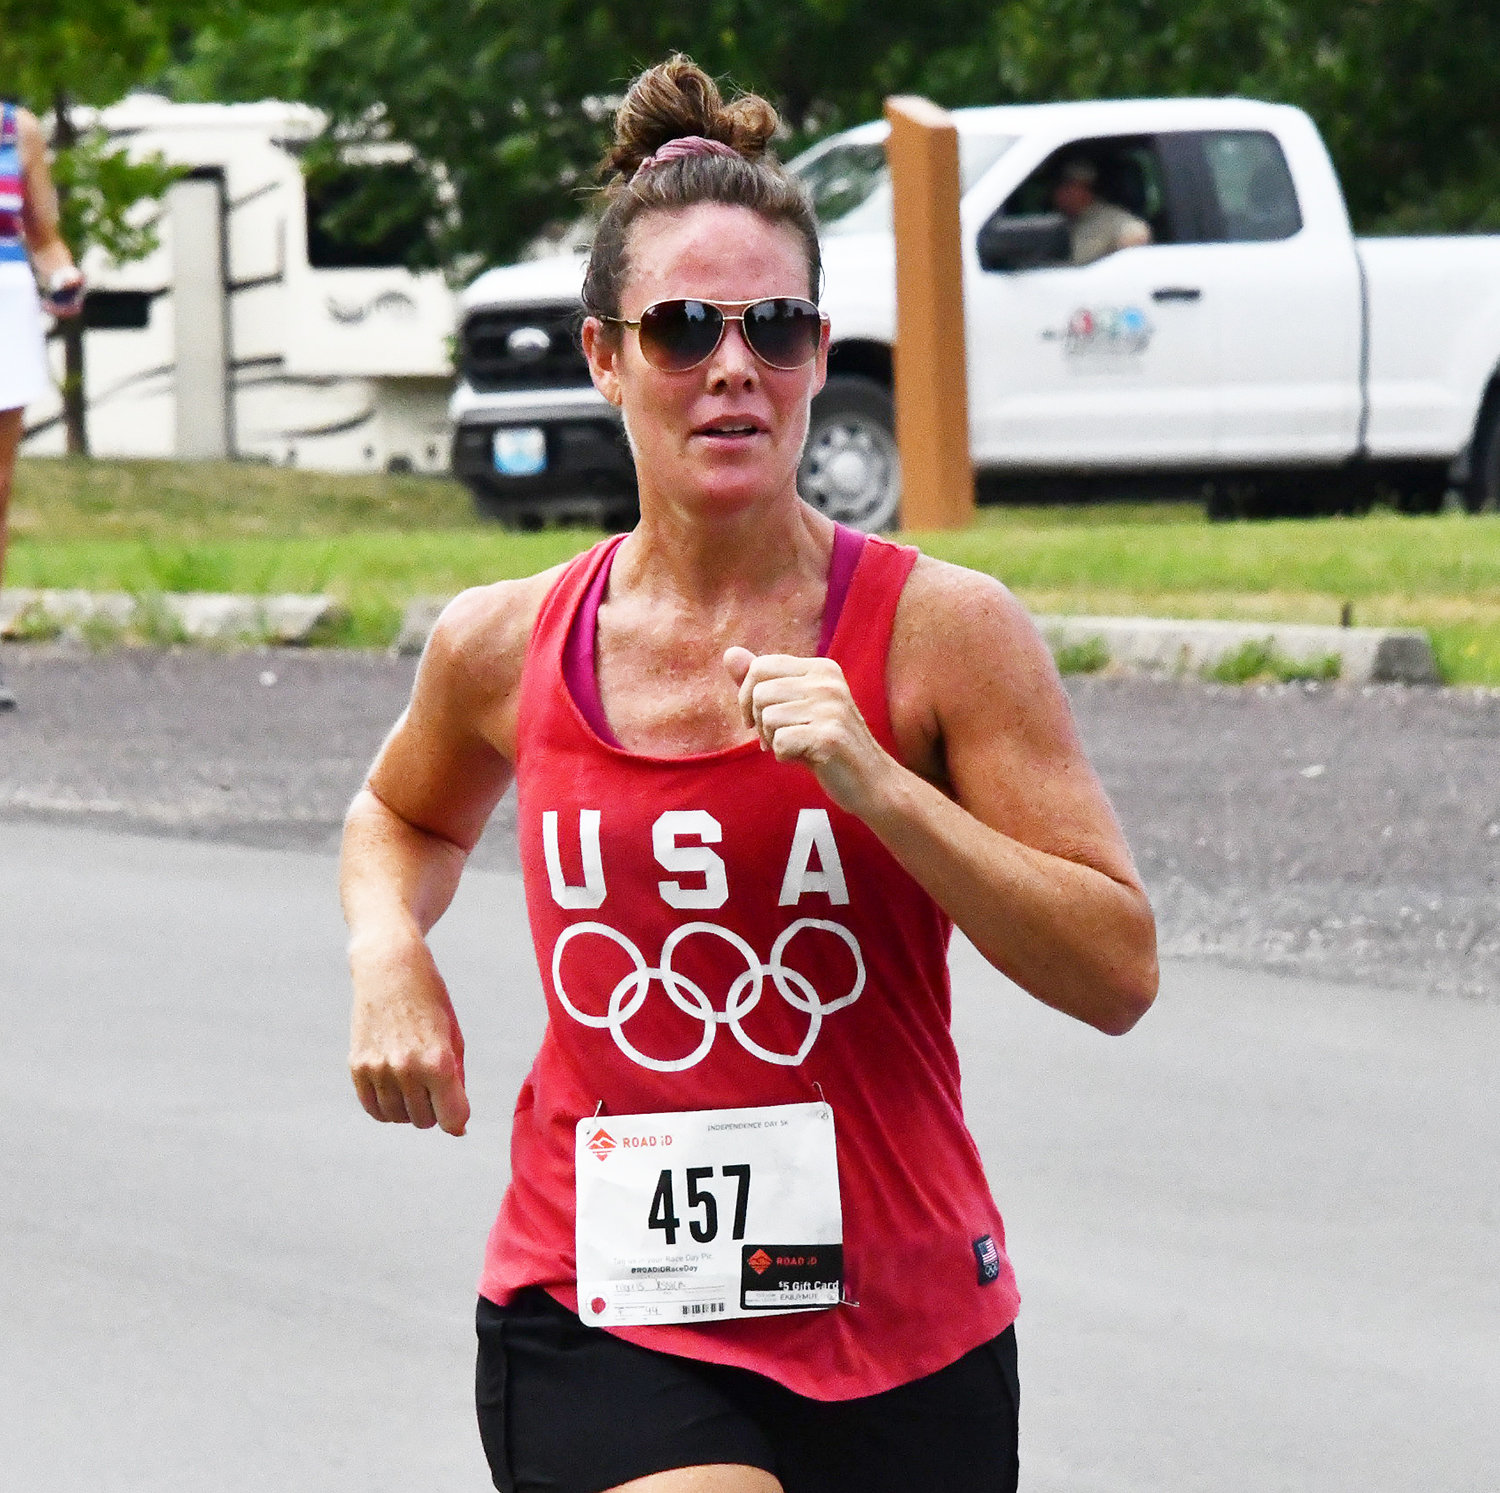 Jessica Morris, wearing a USA Olympic tank top, races toward the finish line in Rothwell Park on Monday, July 4.